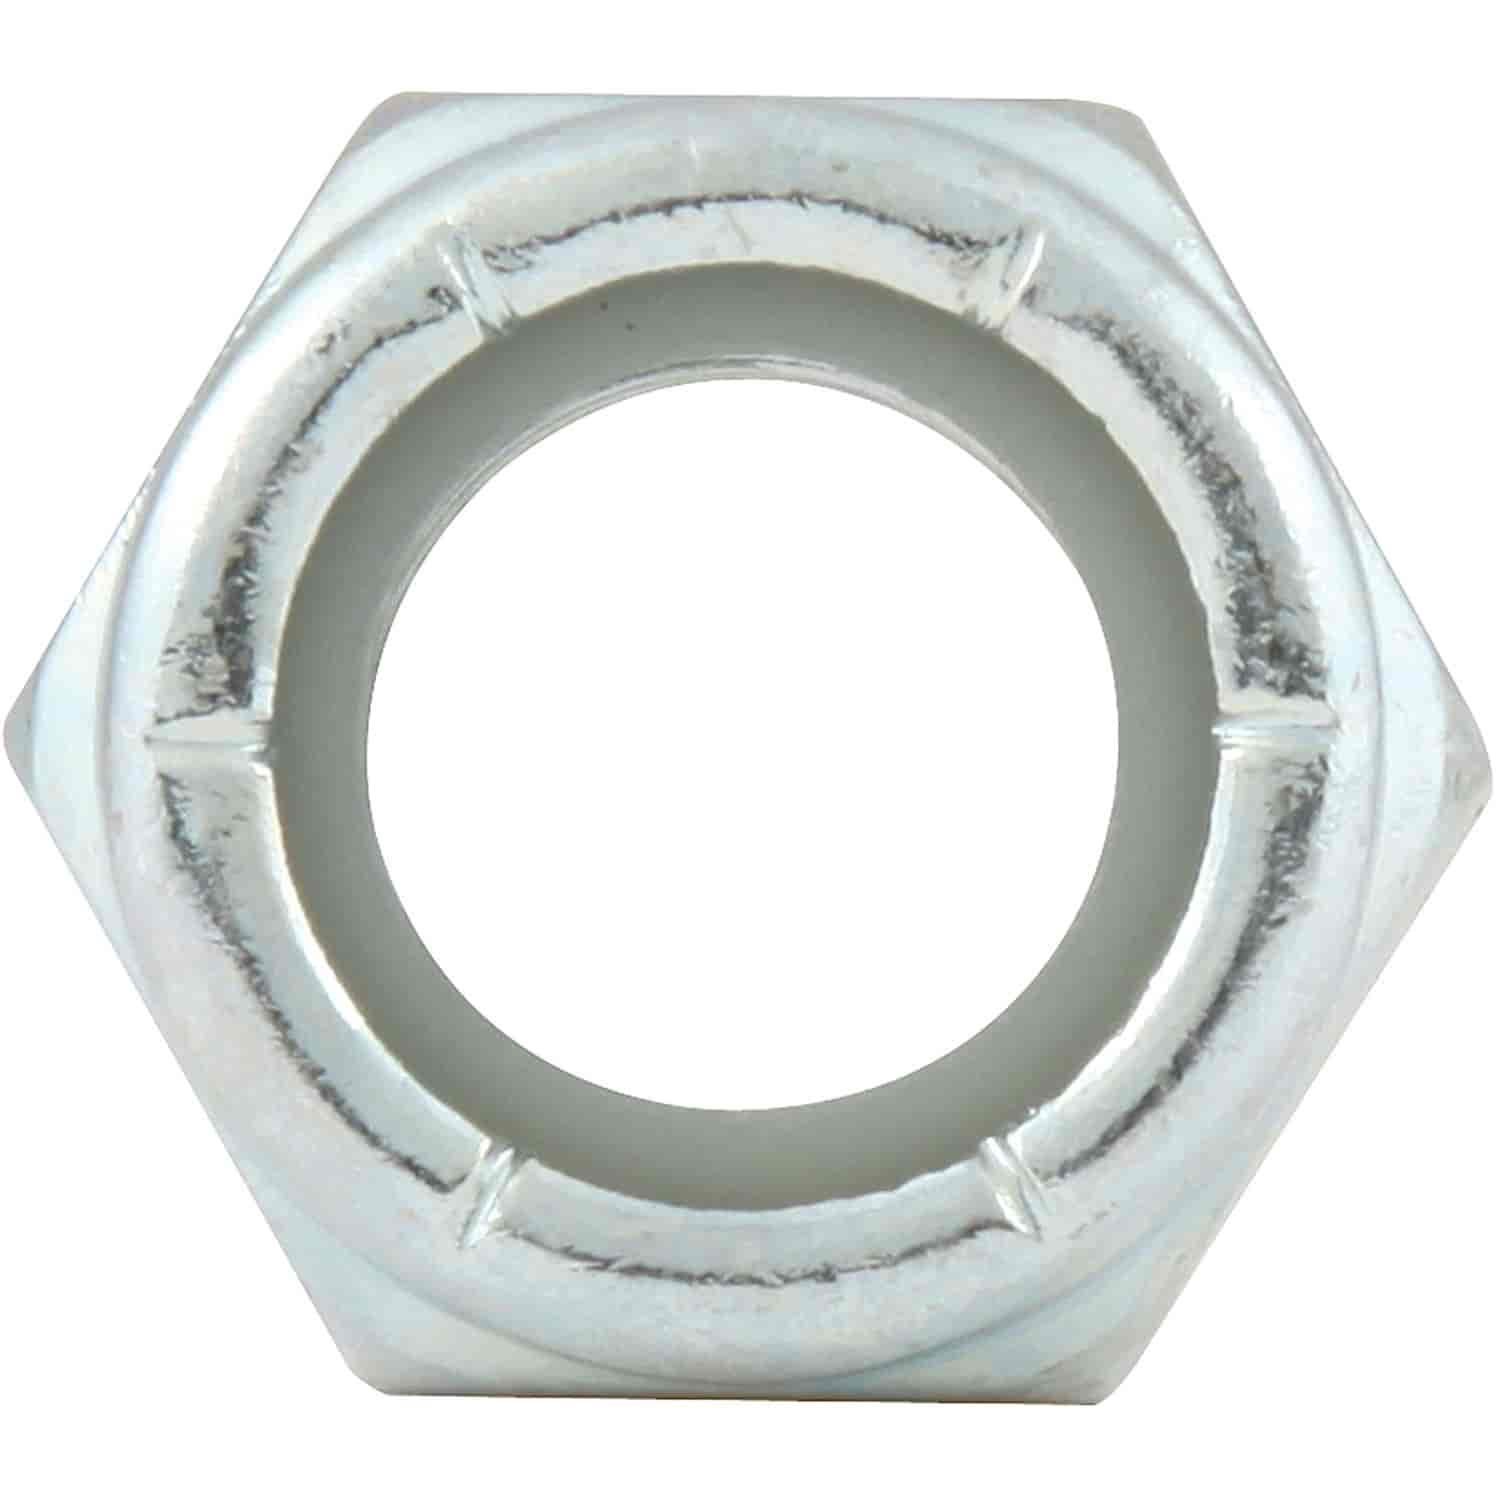 Coarse Thread Hex Nuts With Nylon Inserts 1/2"-13